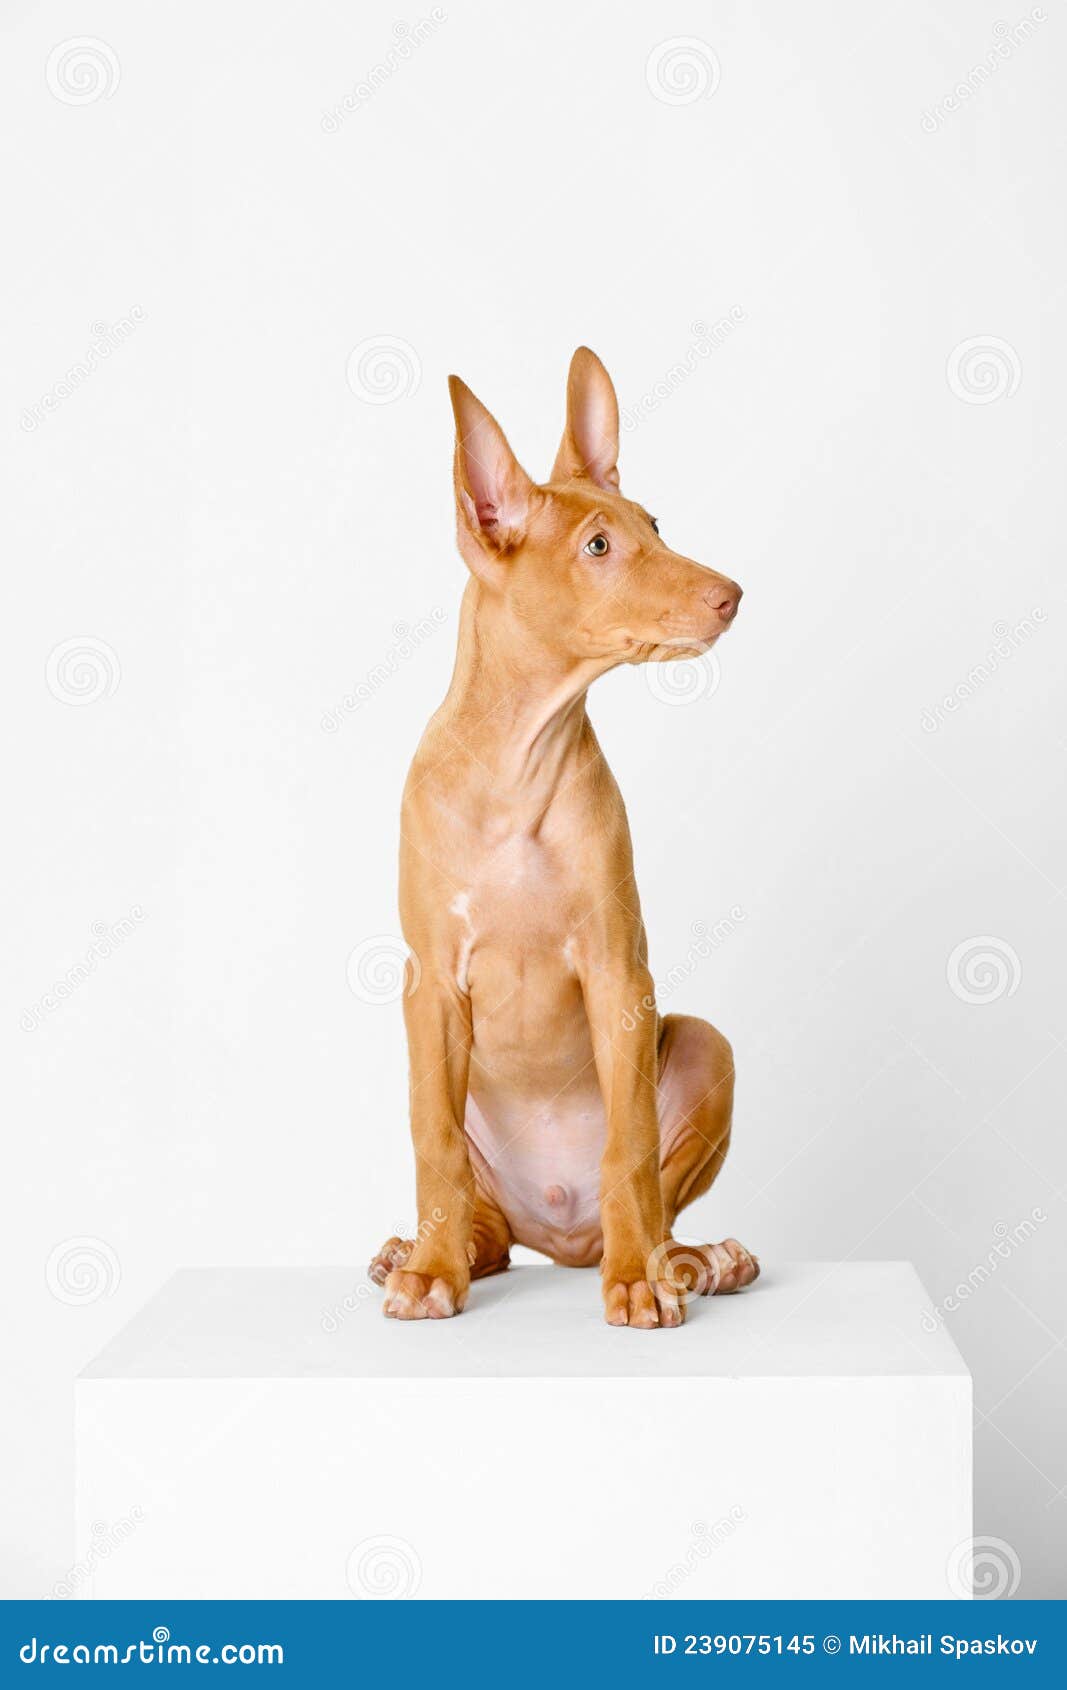 pharaoh hound red dog puppy. close-up portrait on a white background